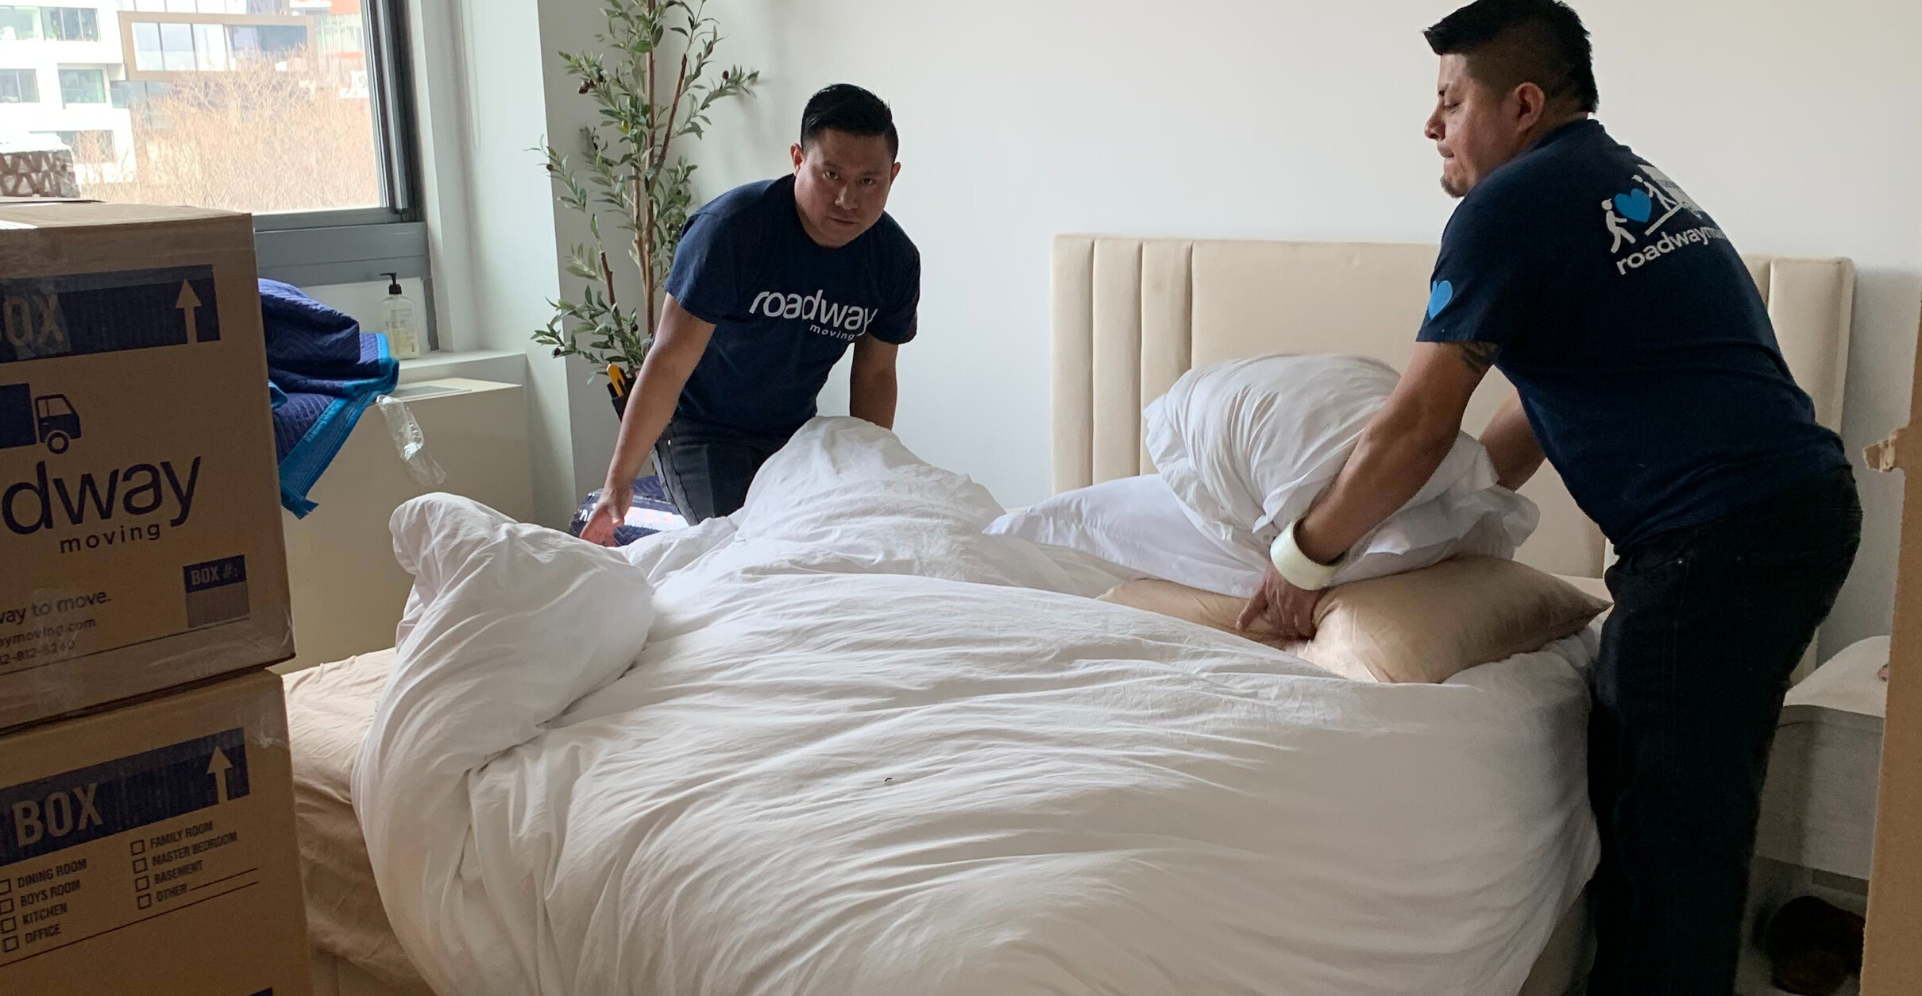 Moving a bed